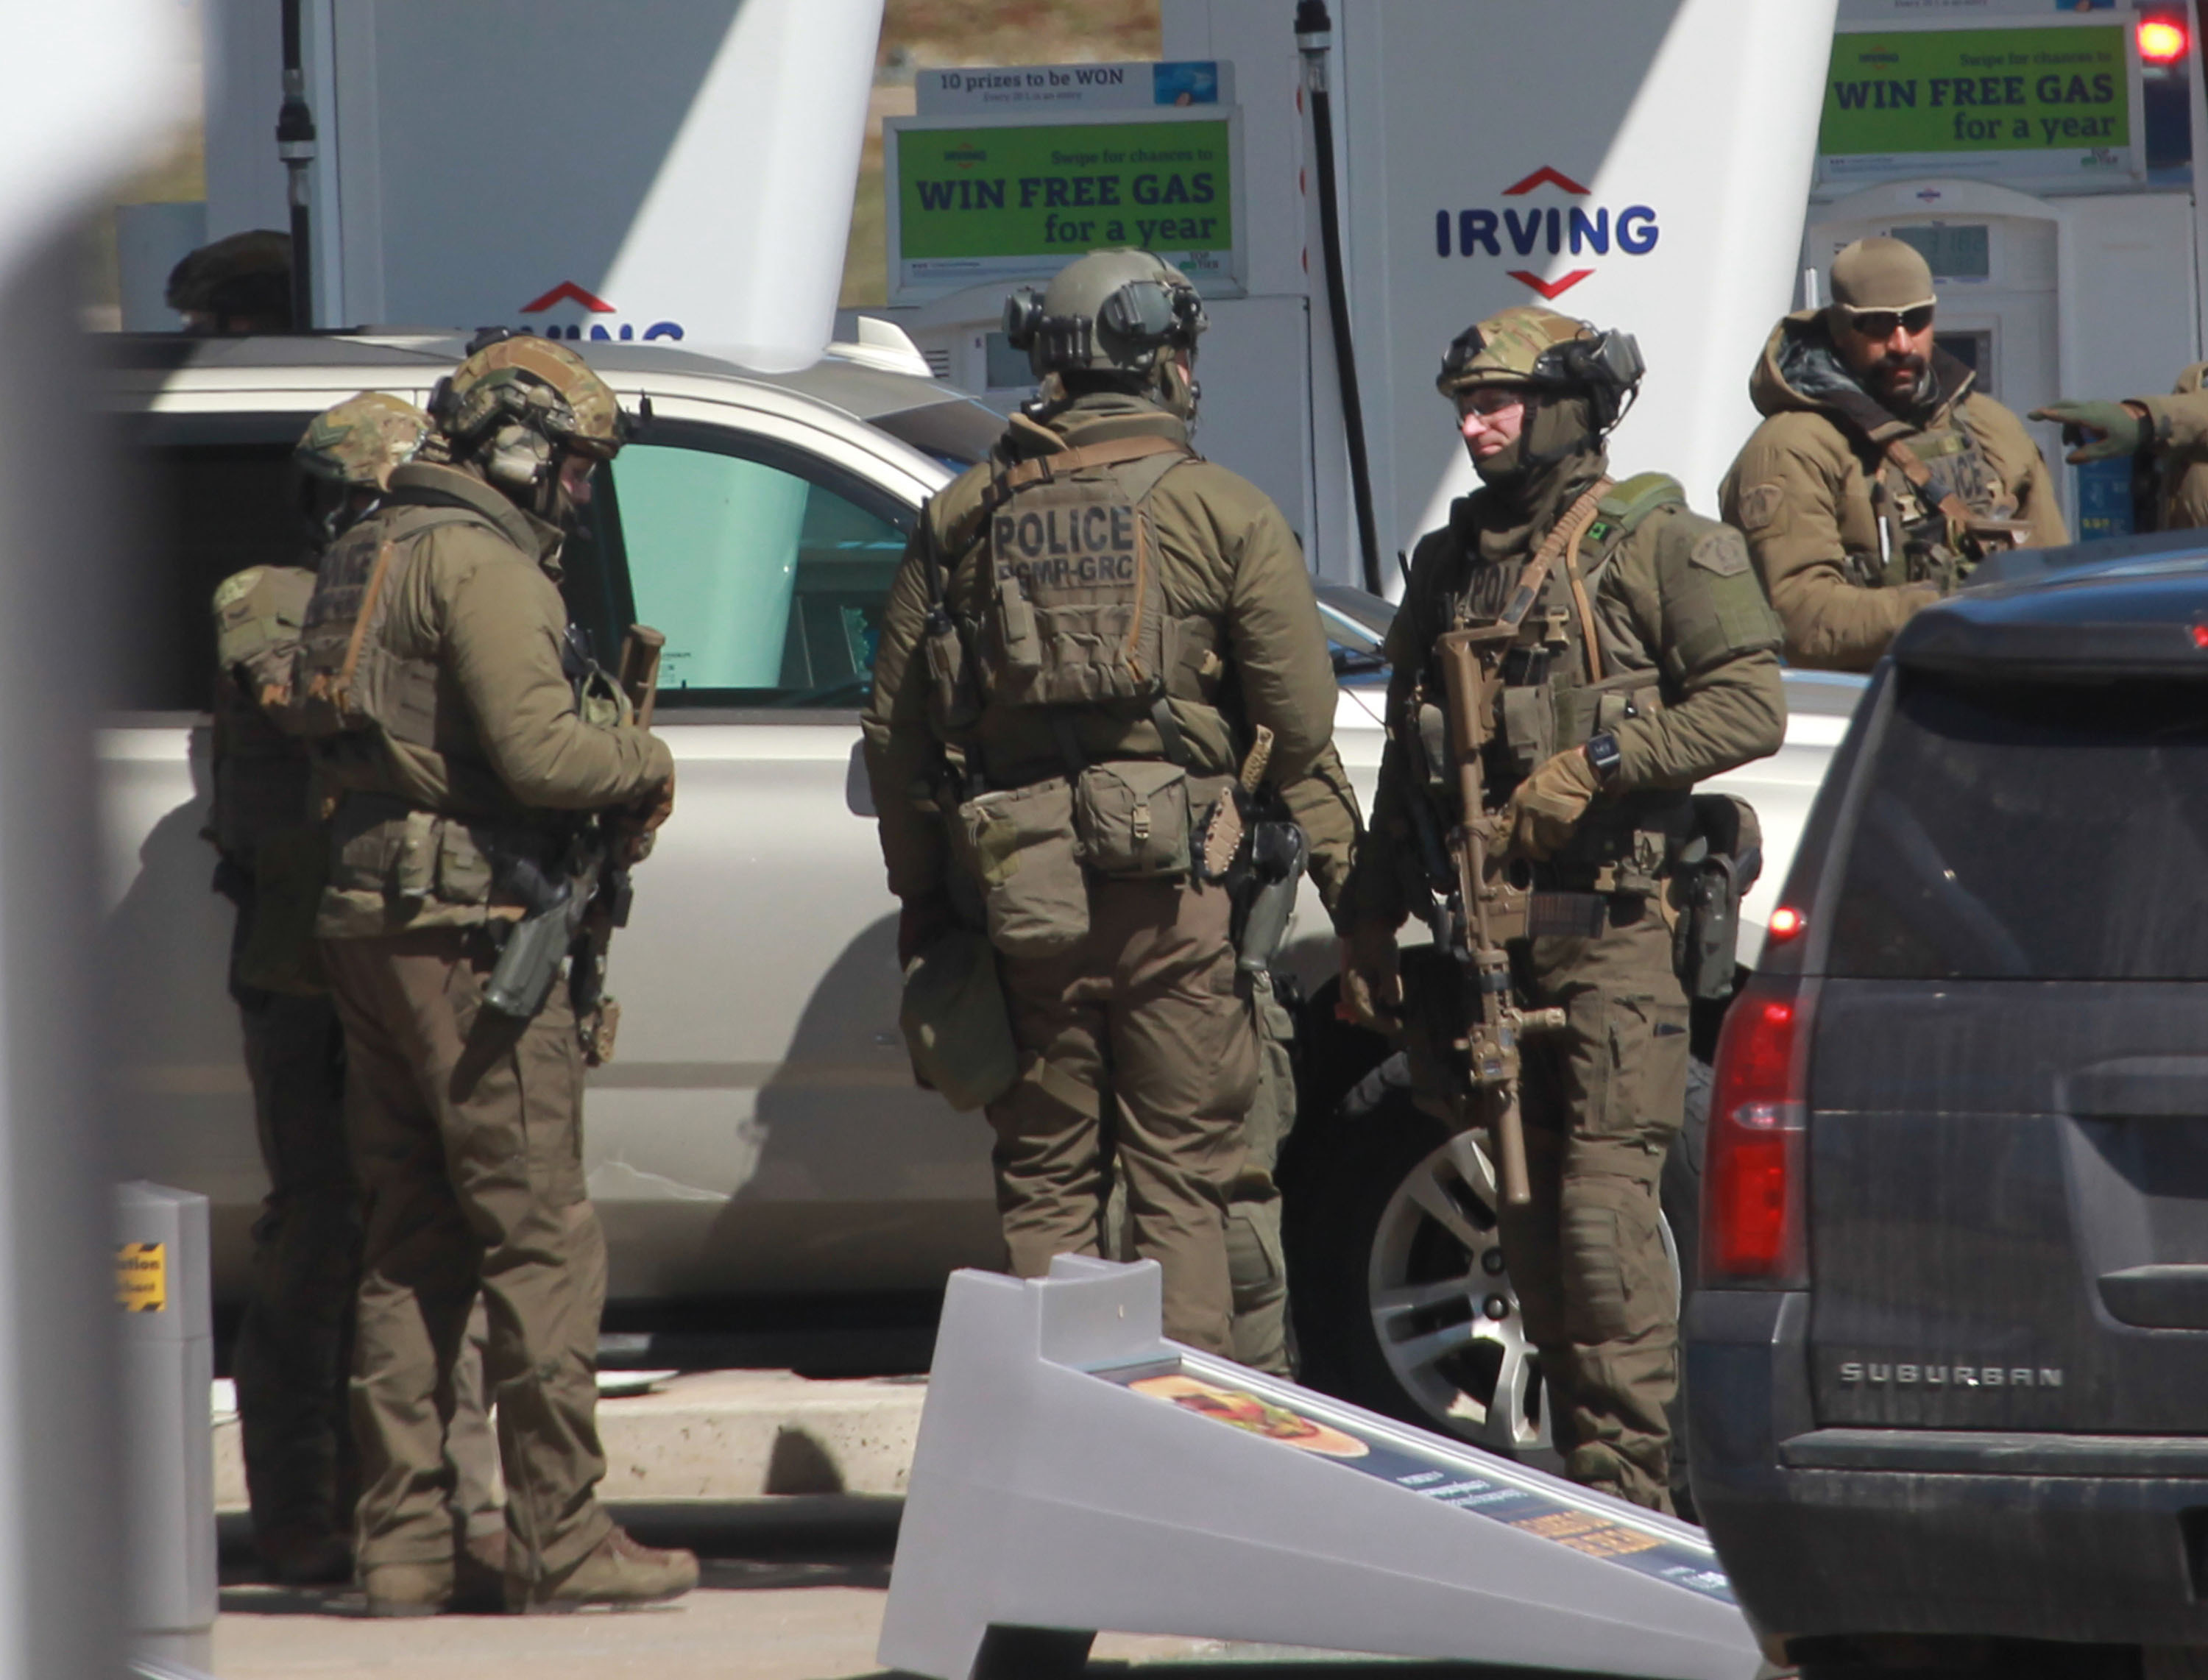 Members of the Royal Canadian Mounted Police (RCMP) tactical unit confer after the suspect in a deadly shooting rampage was neutralized at the Big Stop near Elmsdale, Nova Scotia, Canada, on April 19, 2020. (TIM KROCHAK/AFP via Getty Images)